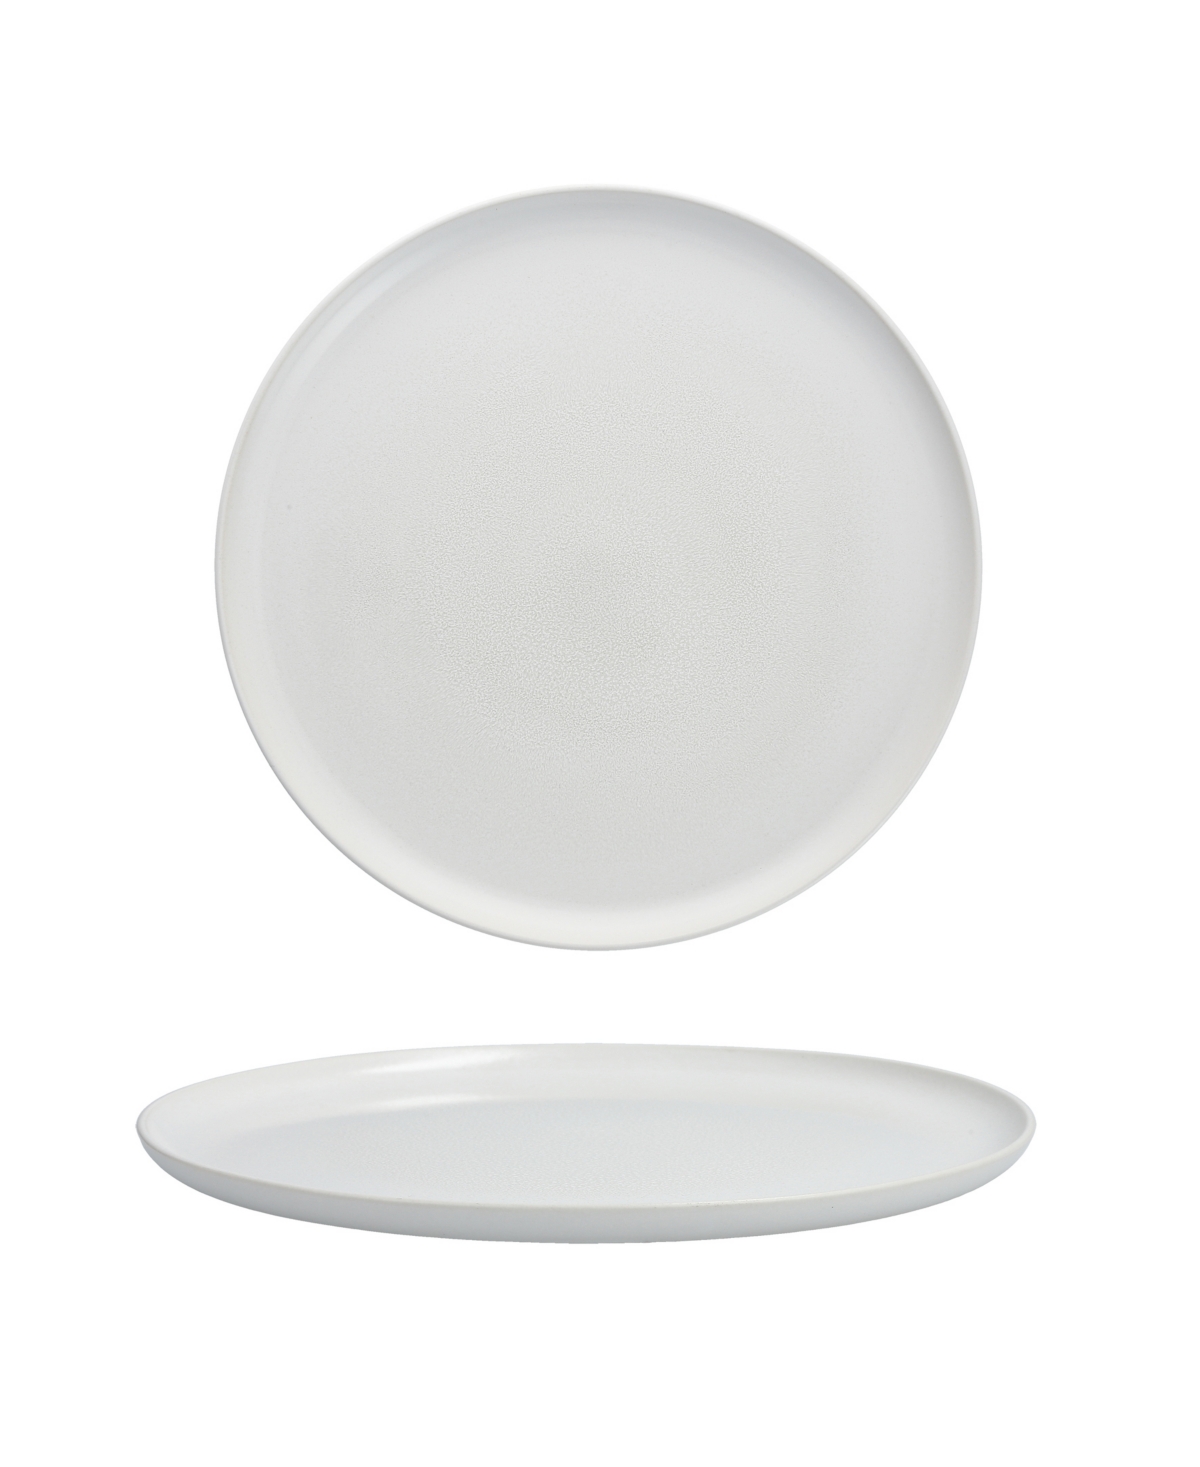 Cloud Terre Miles Dinner Plates, Set of 4 - Charcoal